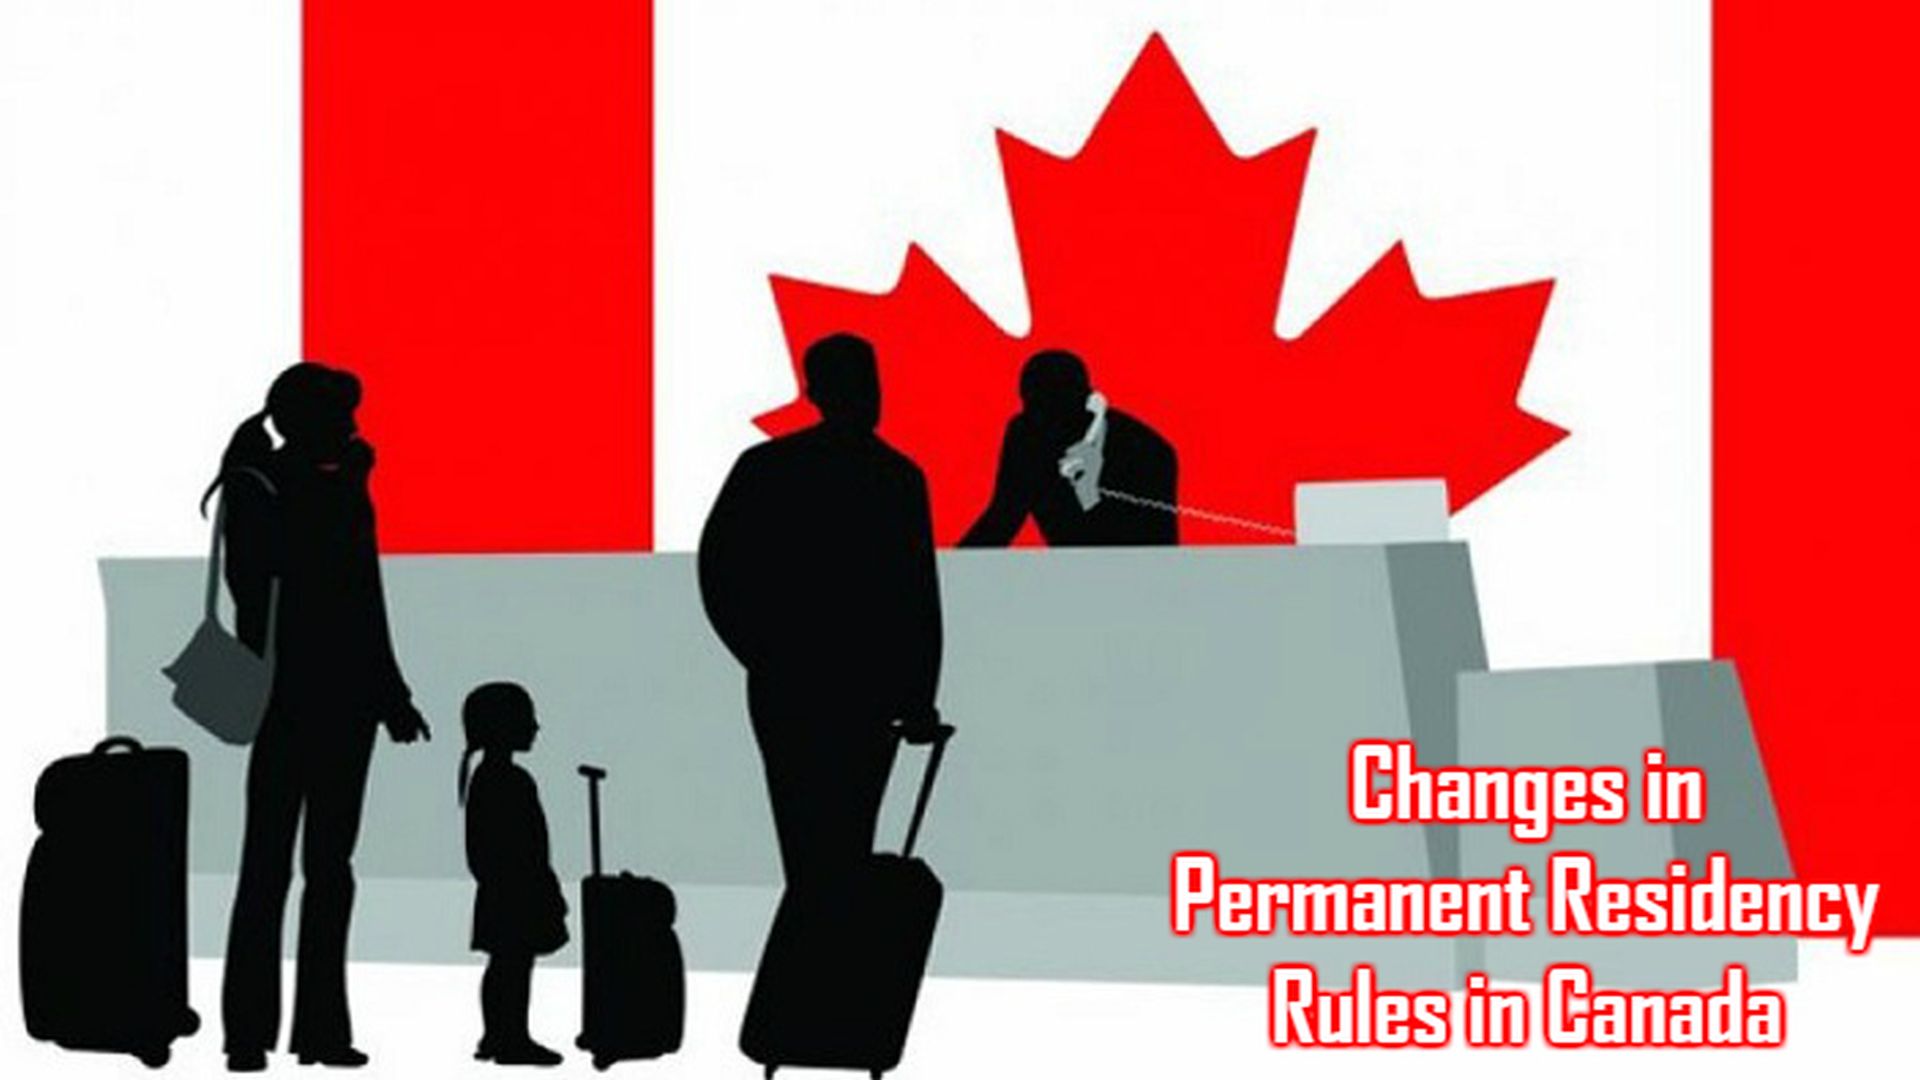 Canada is All Set to Announce New Rules for Permanent Residency Based on Medical Conditions in April 2018